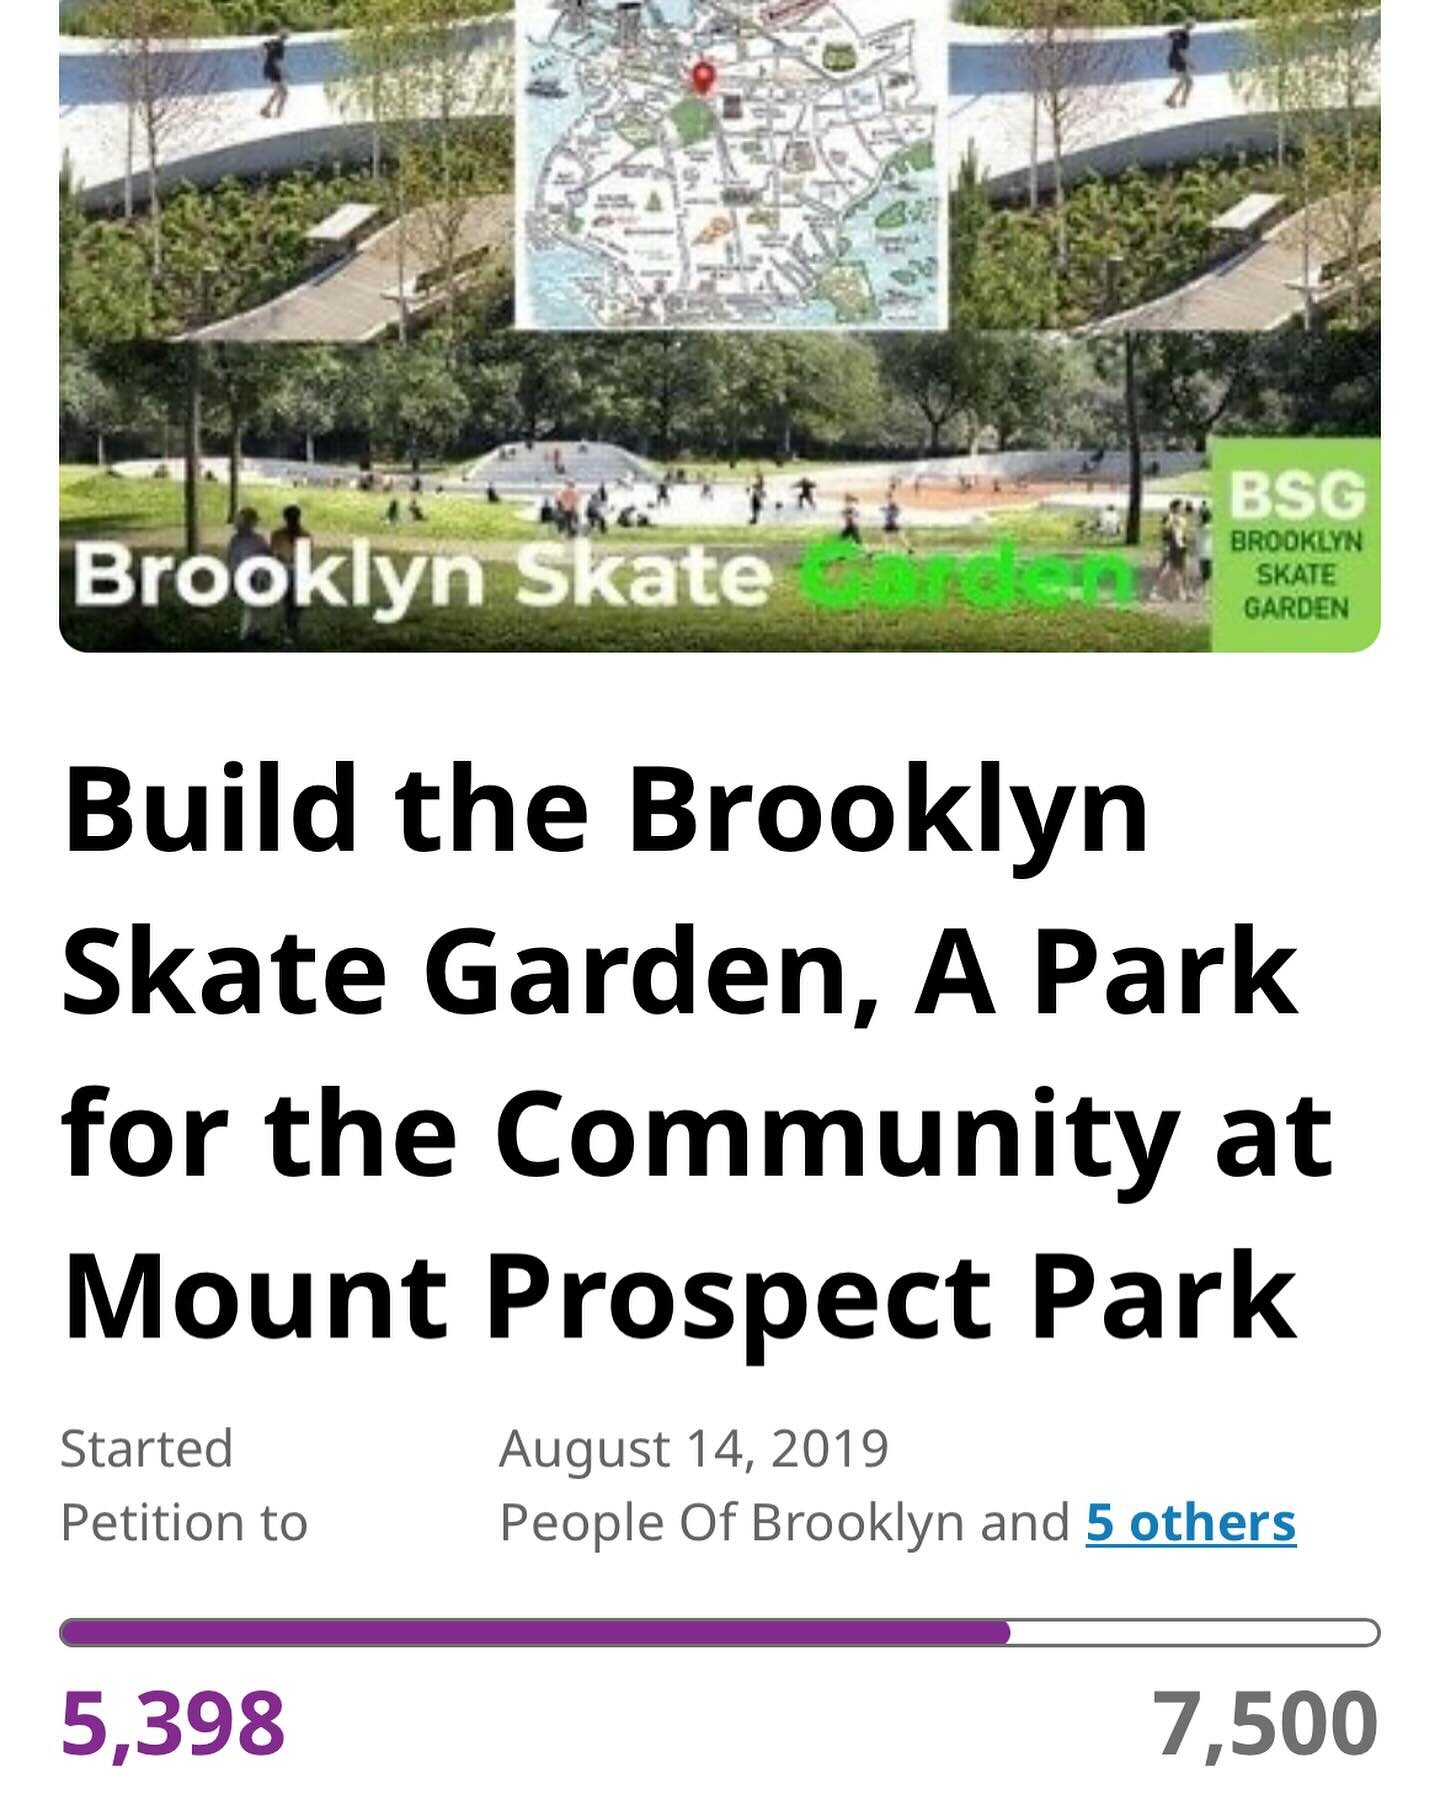 Support building the Brooklyn Skate Garden at Mount Prospect by continue to sign our petition on Change.org (link in bio) 

This petition was started originally in 2019 by @wil540_  a skate advocate and a  group of young teenagers who wanted to see a